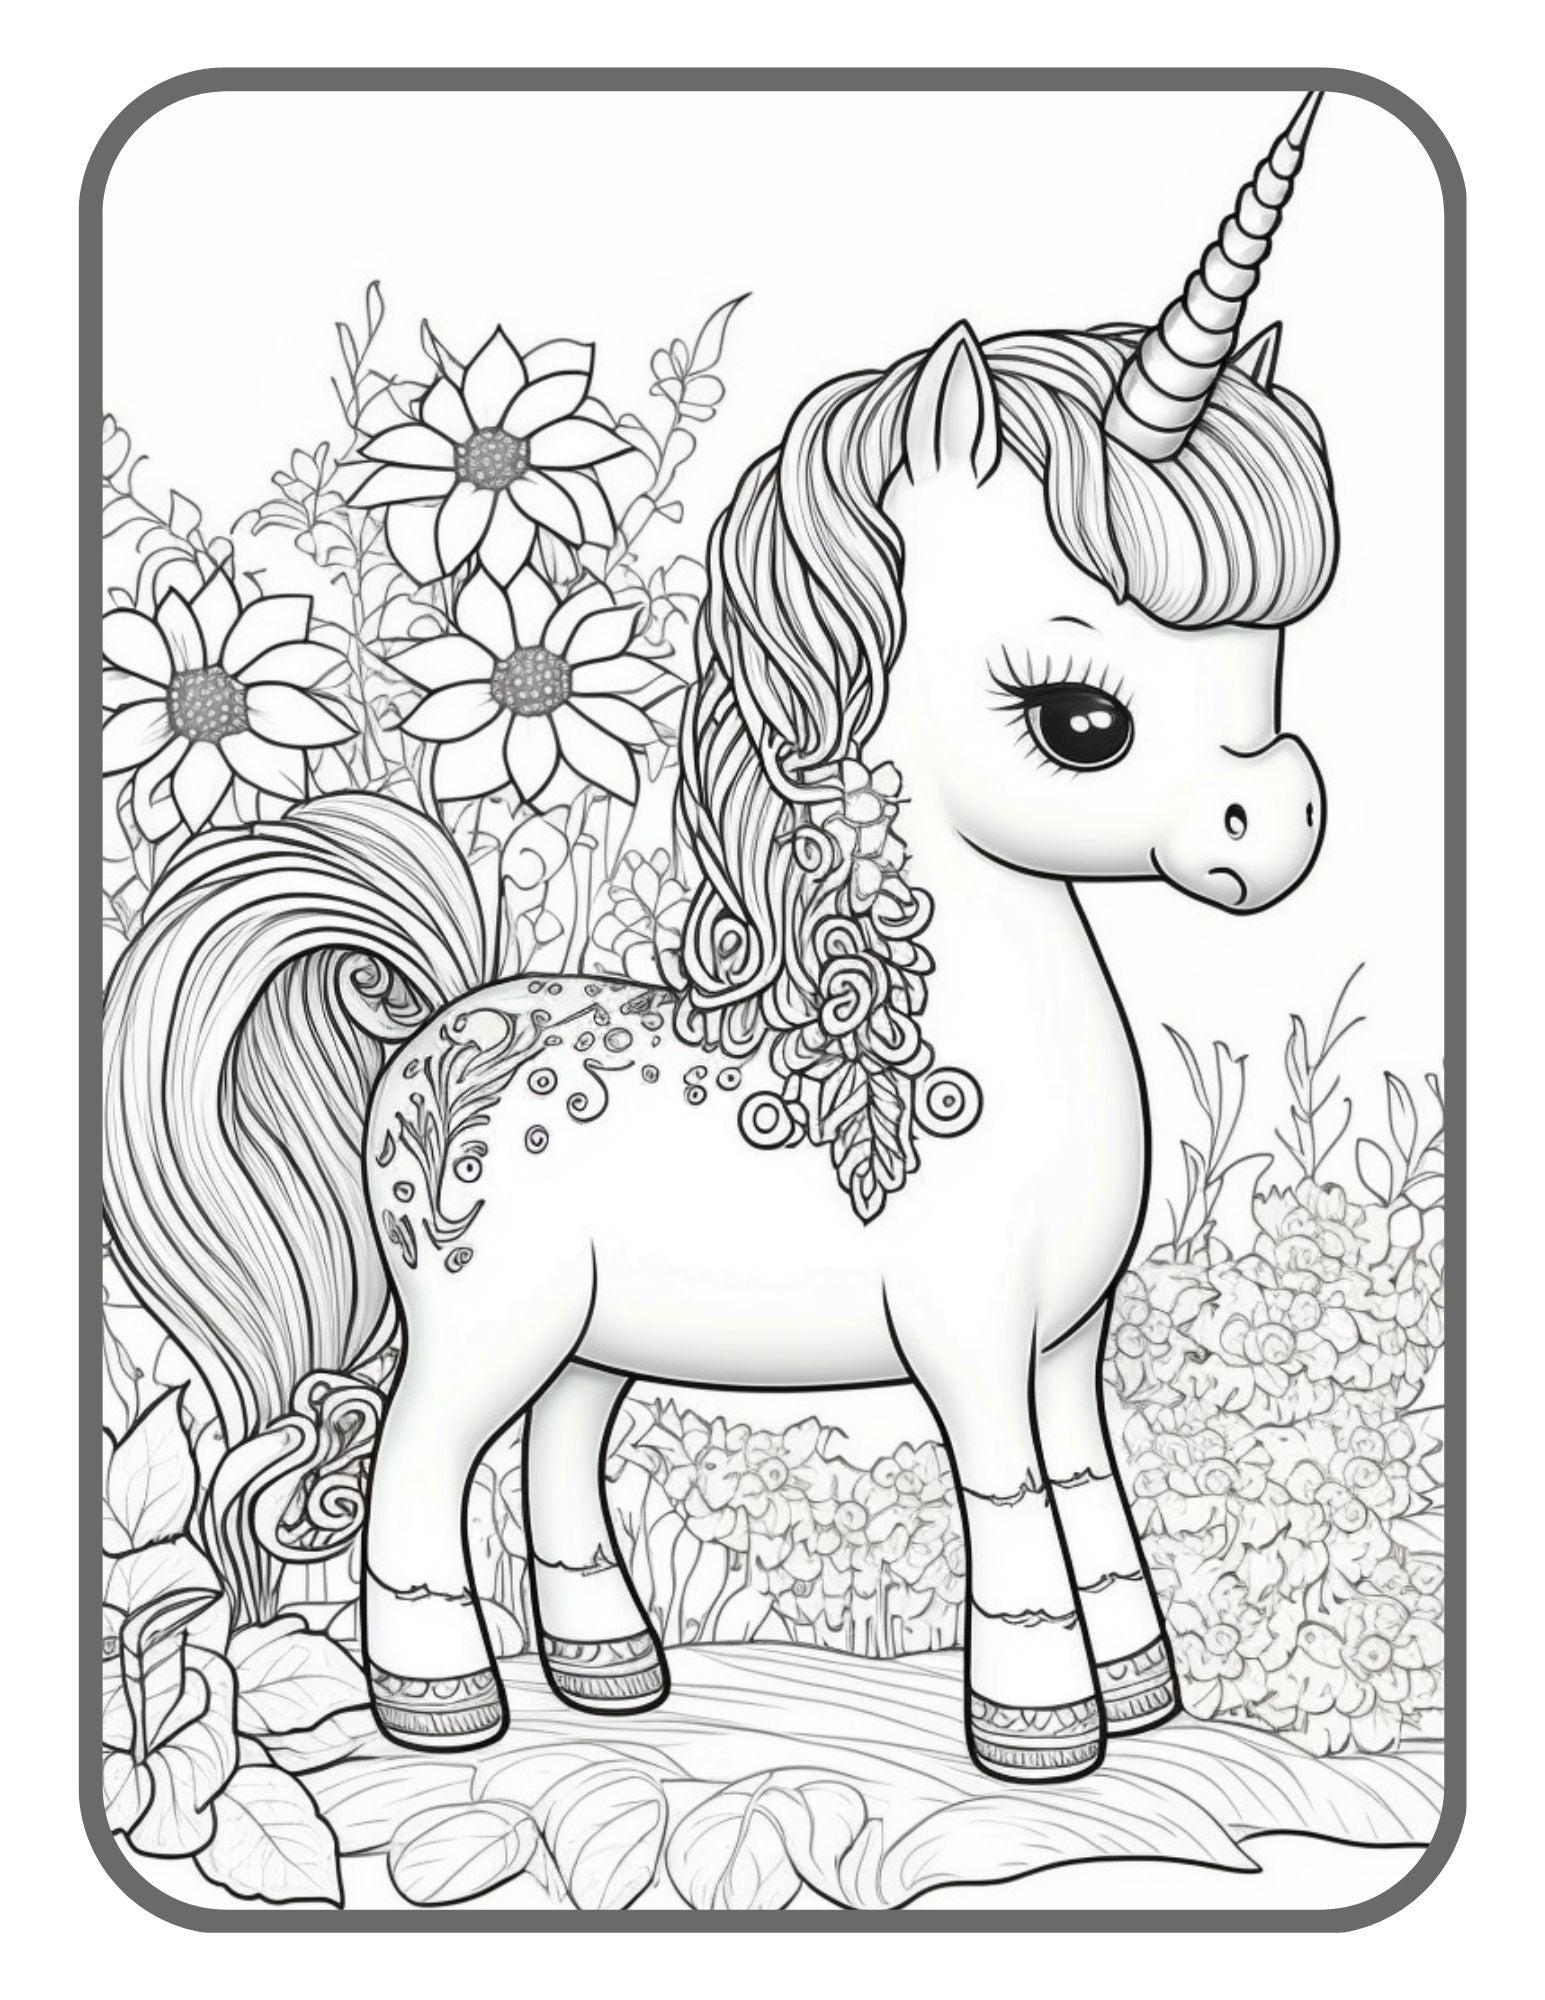 Unicorn Coloring Book For Kids Ages 4-8 US Edition: 50 Pictures To Color:  Fun and Beautiful Unicorn Coloring Pages (Books for Kids) (Paperback)